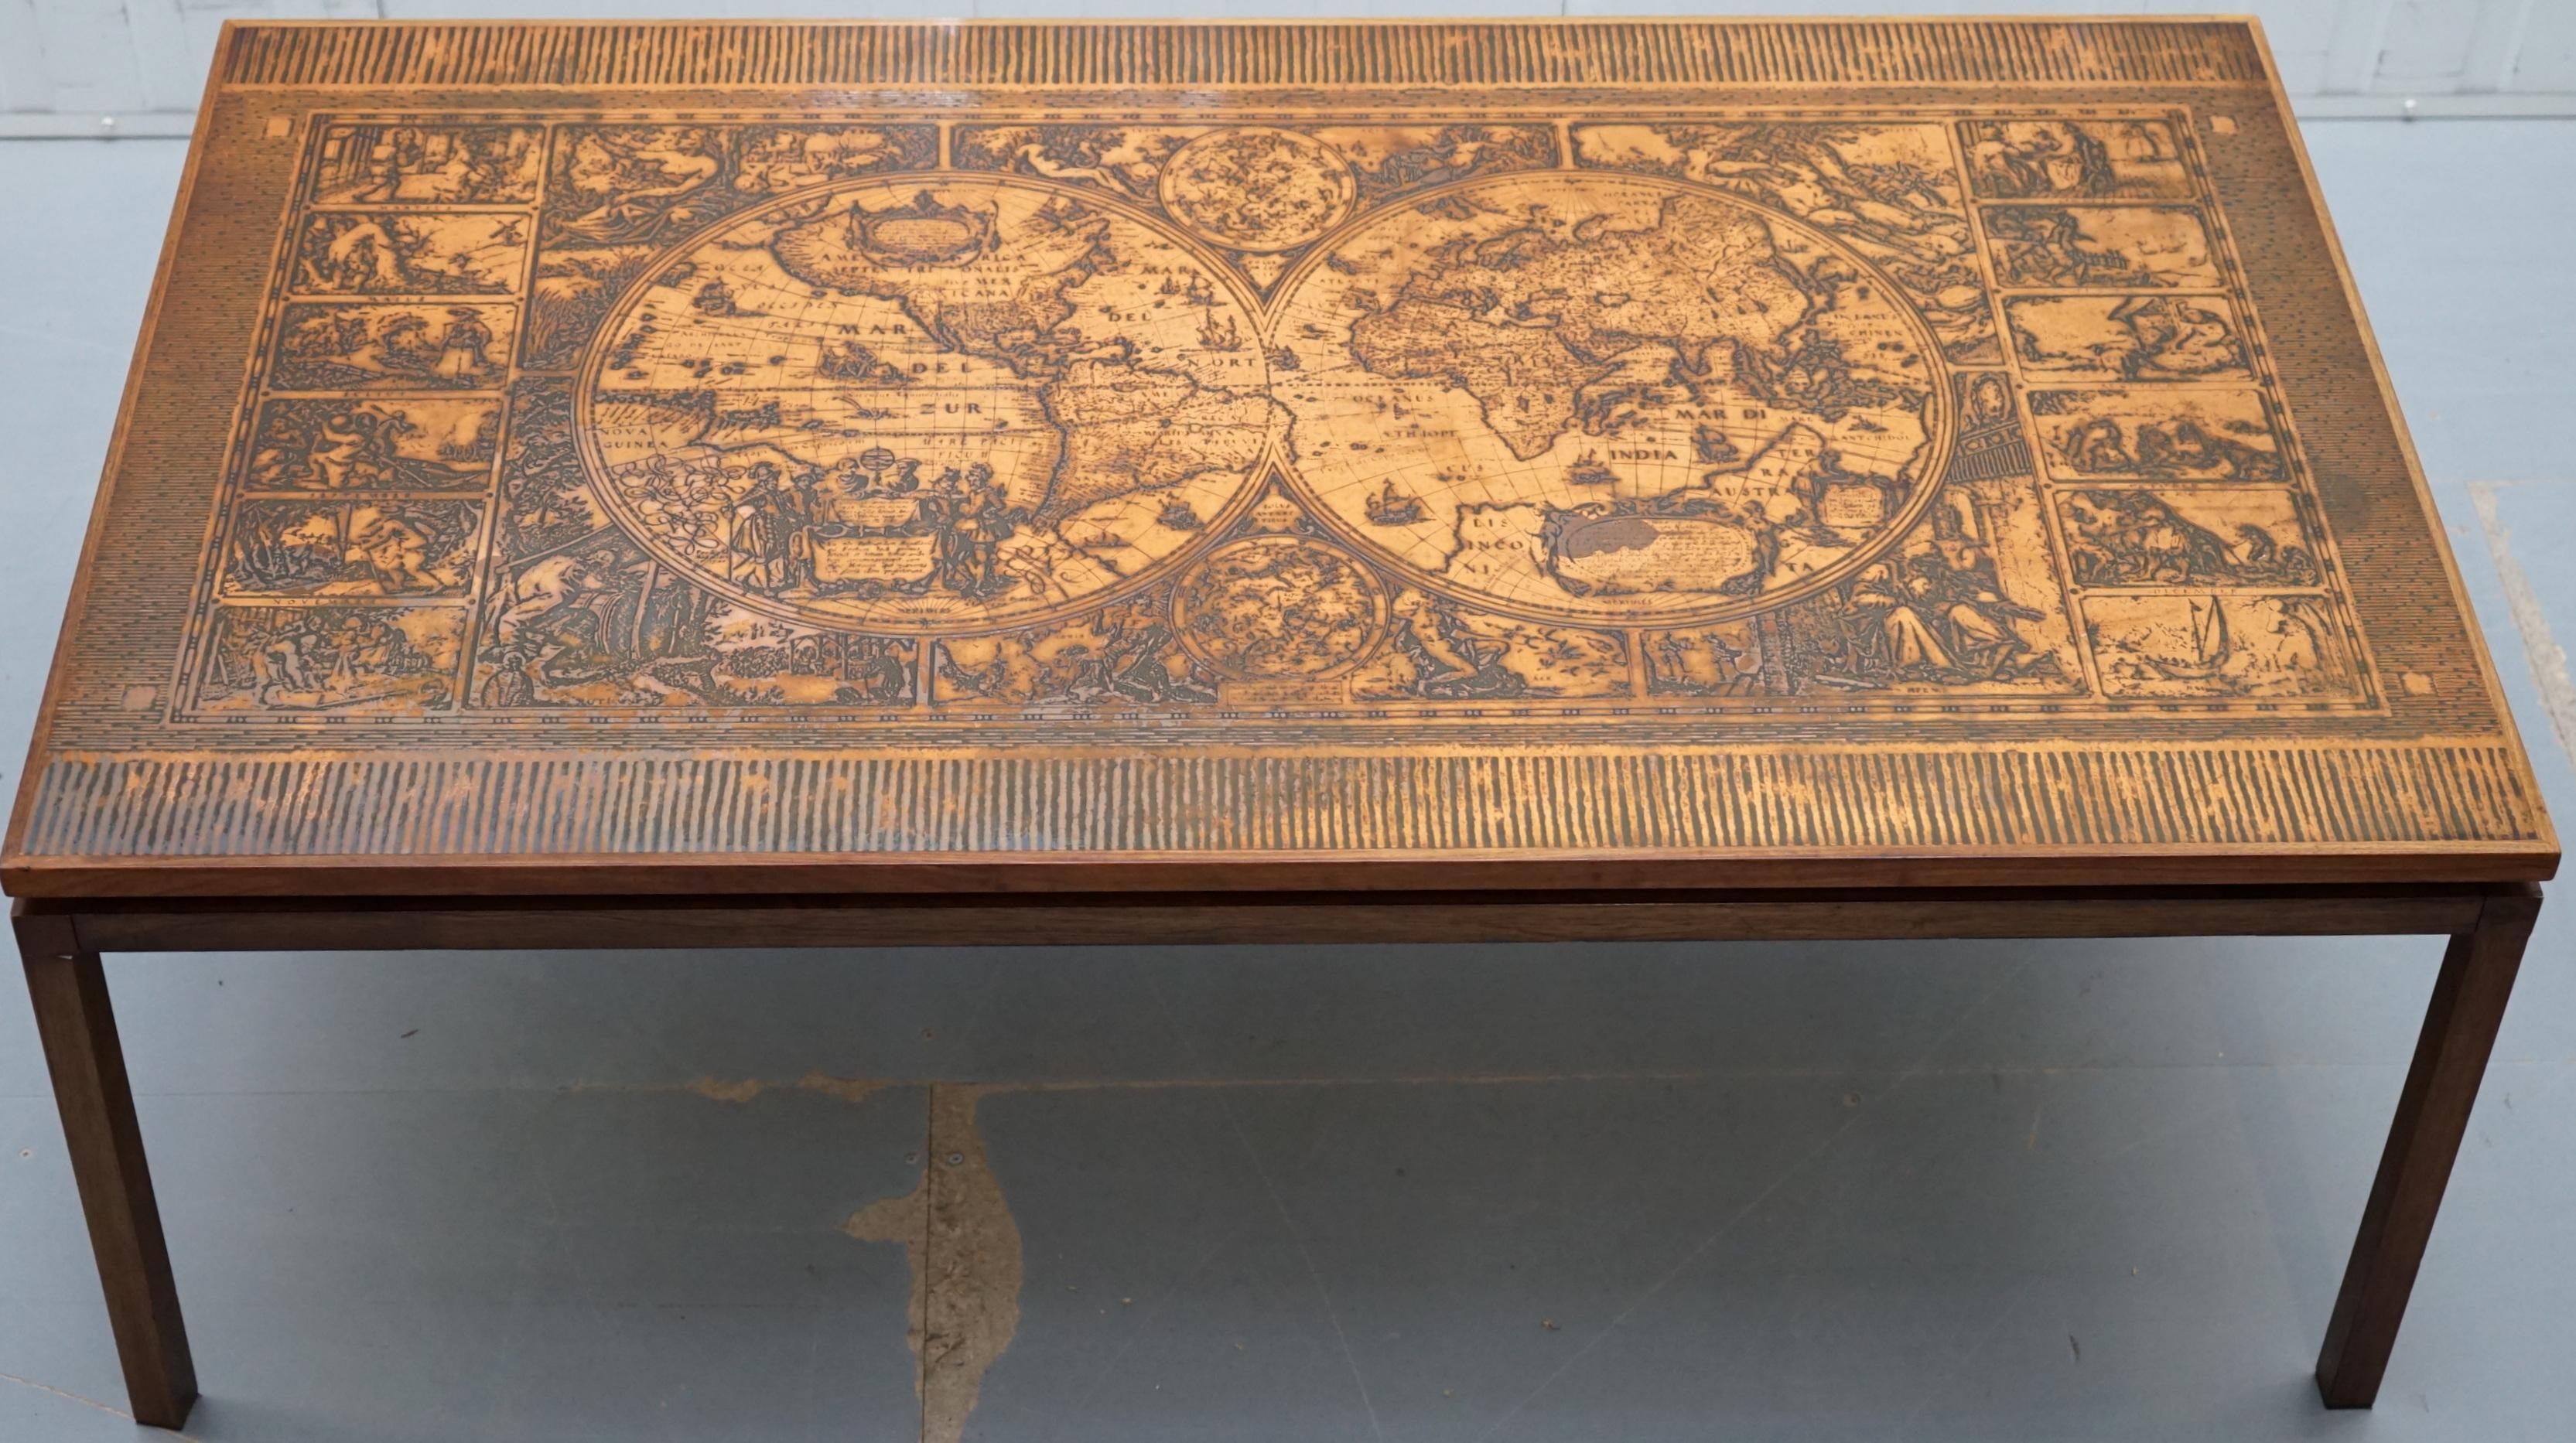 We are delighted to offer for sale this highly decorative coffee table with hand engraved copper plate surface depicting the world maps and the Roman calendar 

A very good looking and well-made piece in lightly restored condition throughout. The